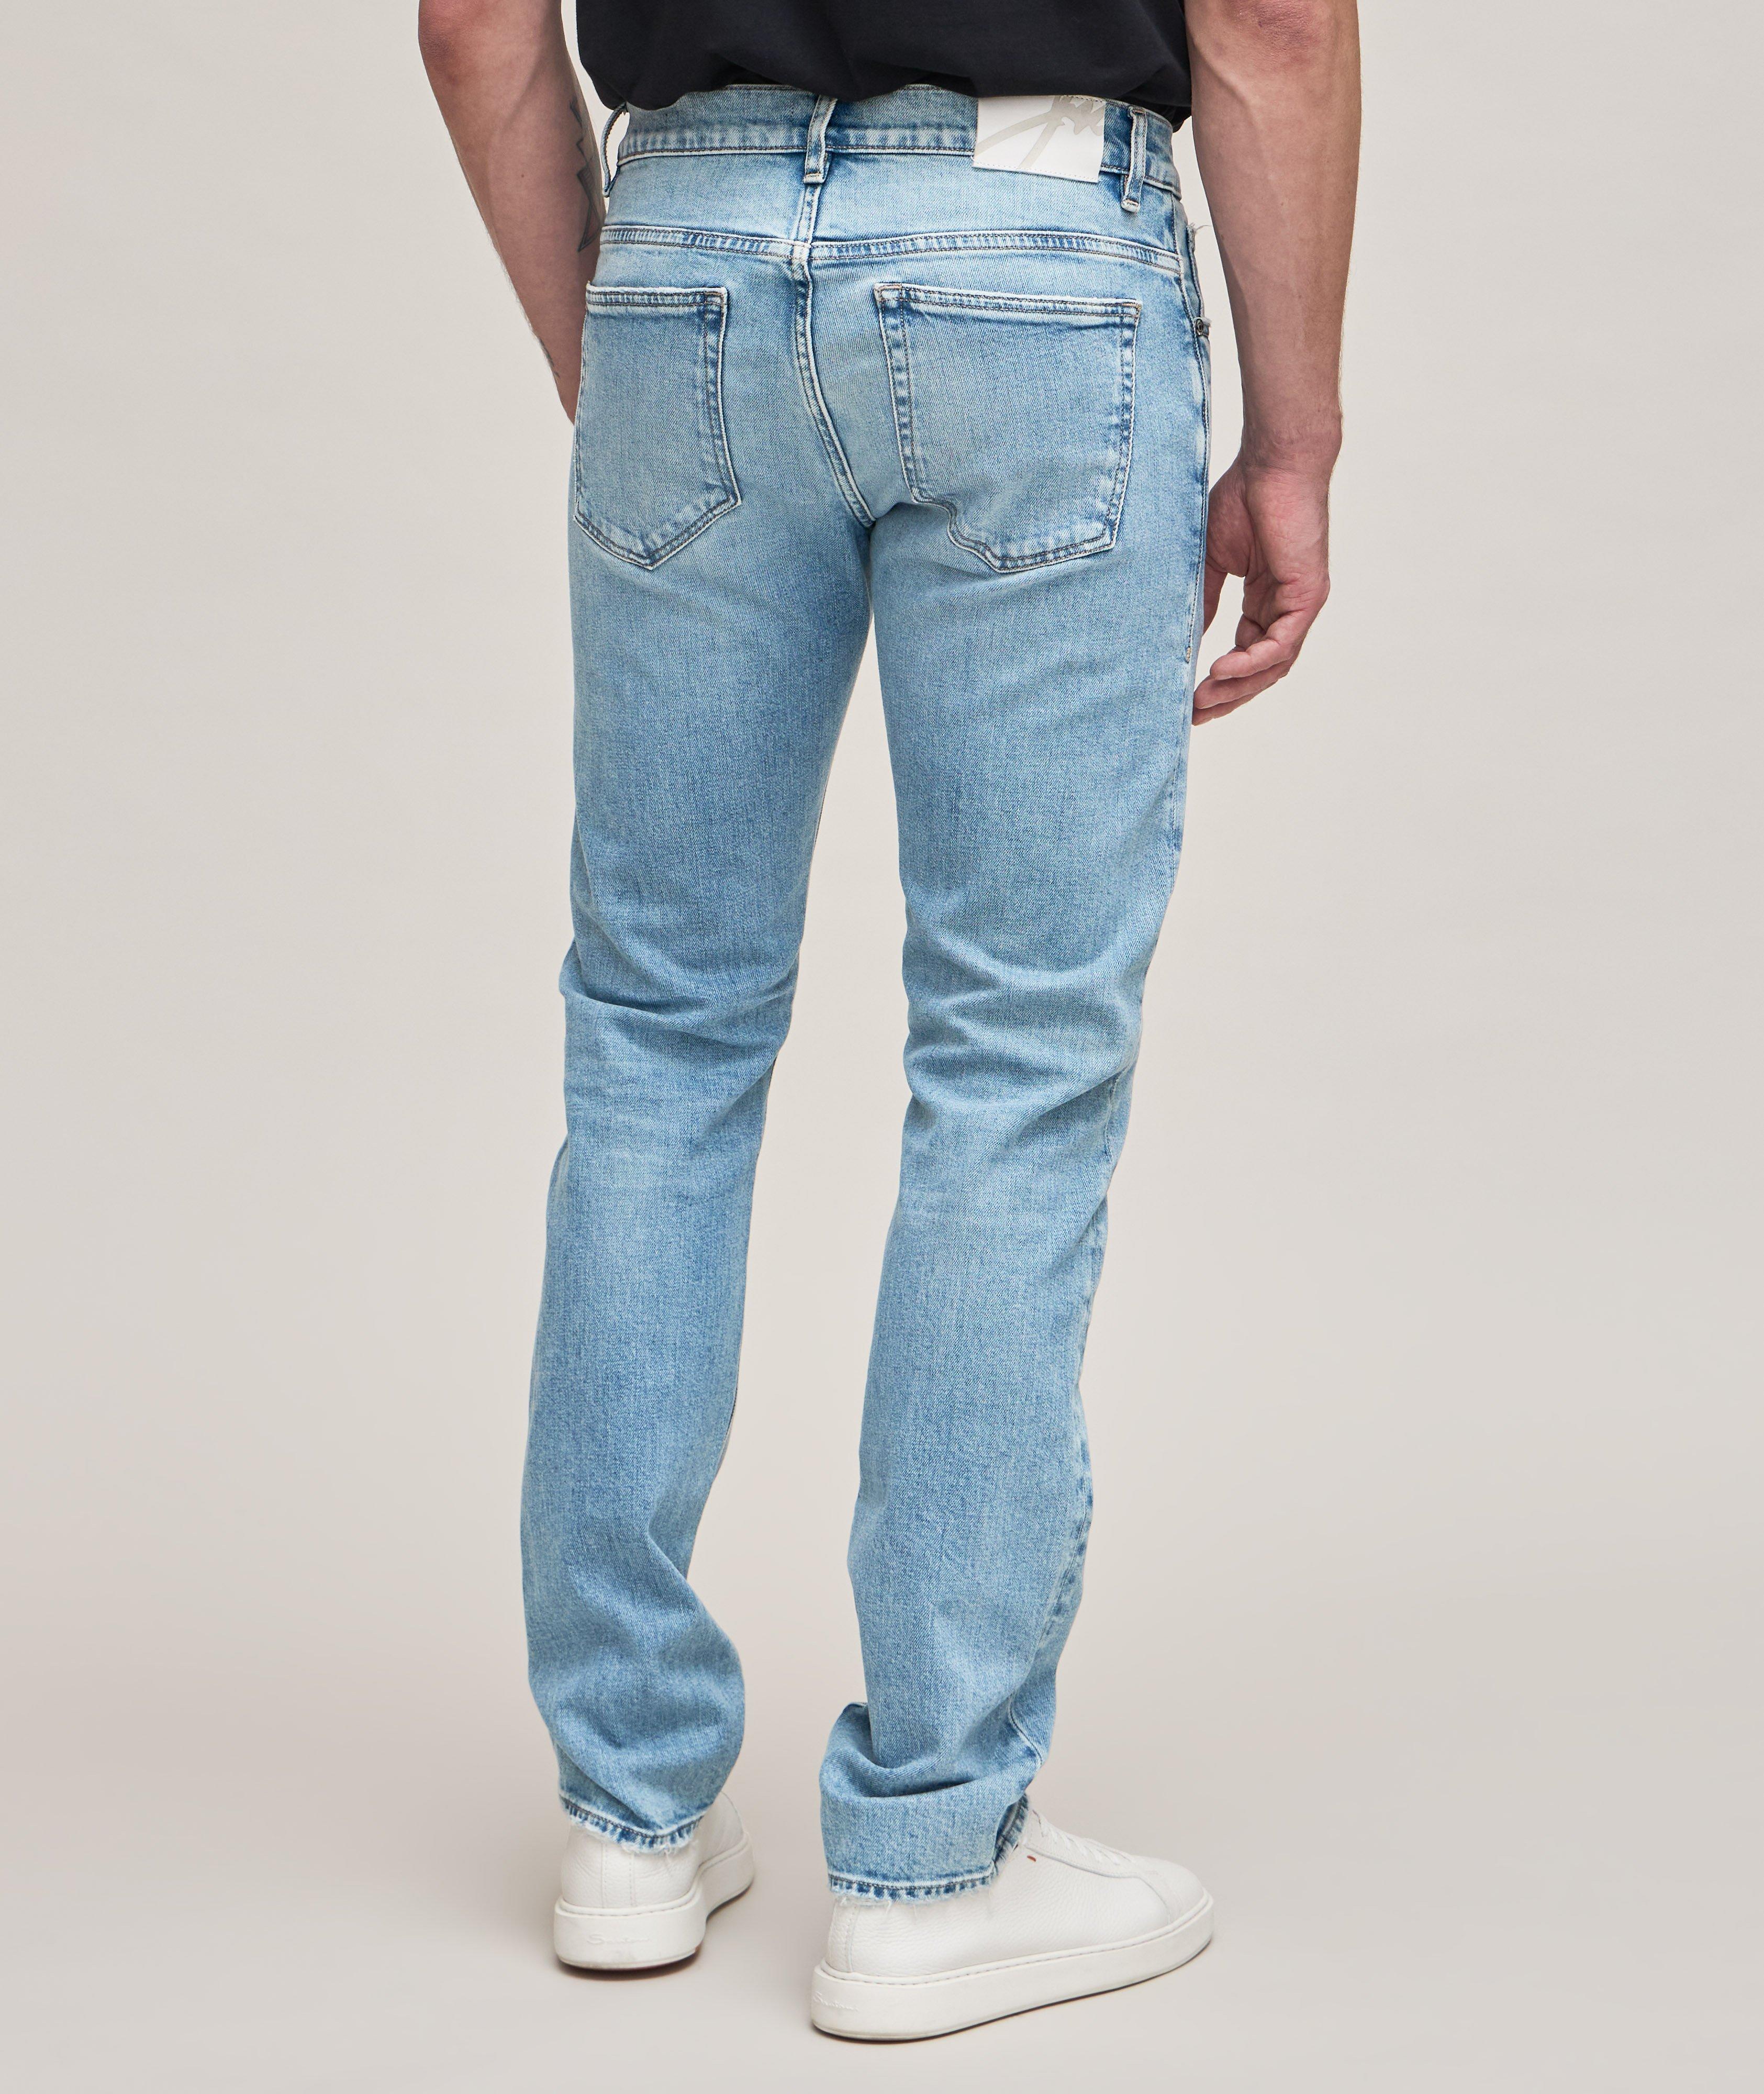 Axe Vintage Slim Straight Fit Jeans